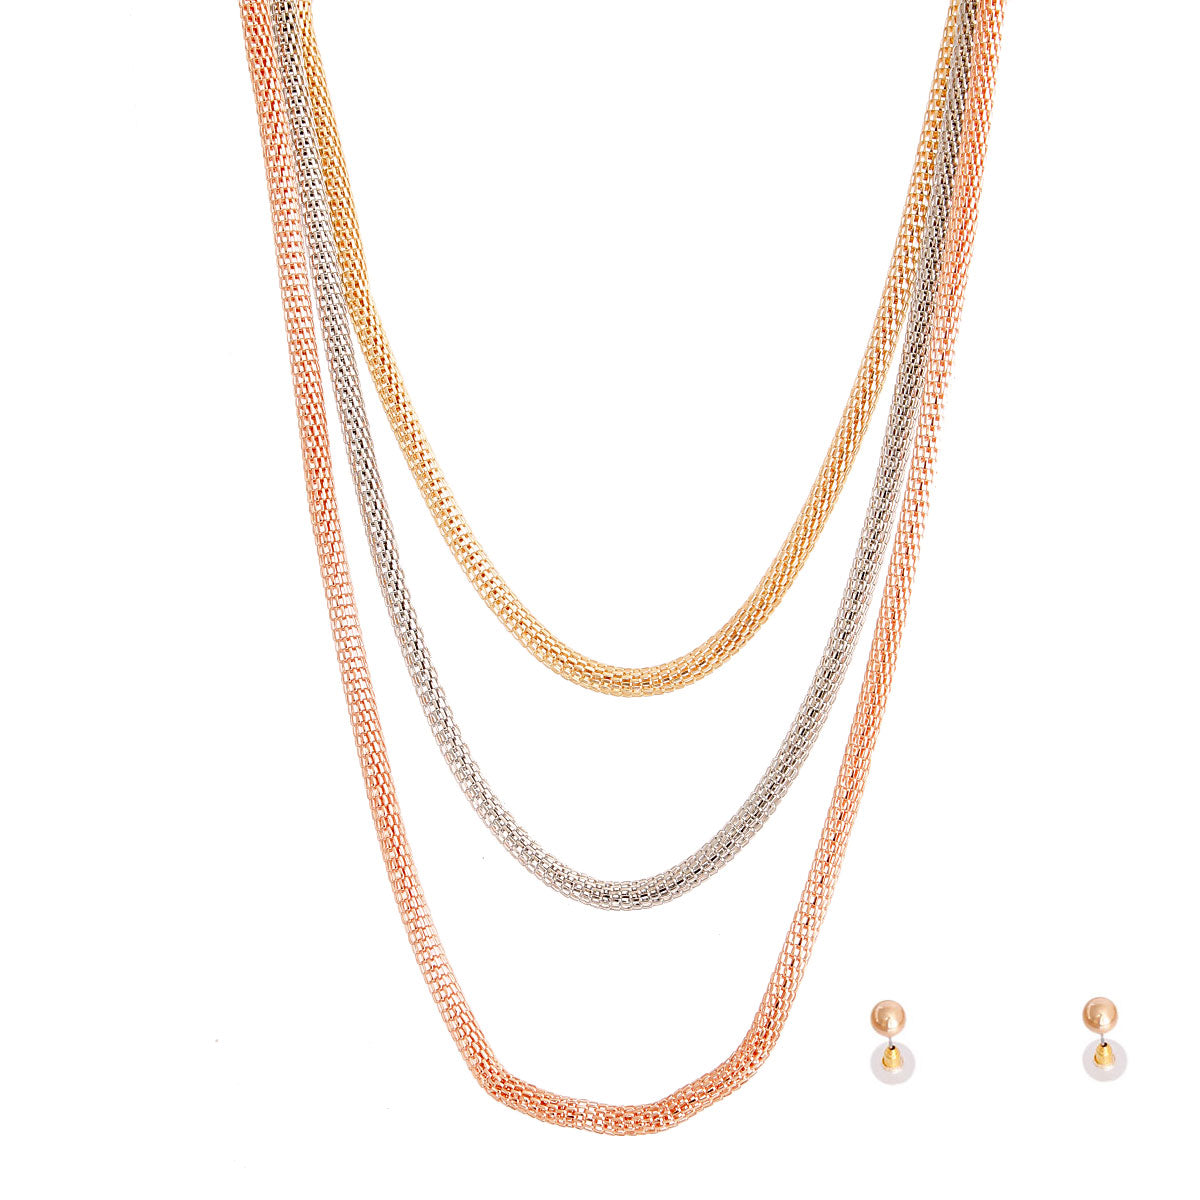 Mixed Metal Mesh Chain Necklace